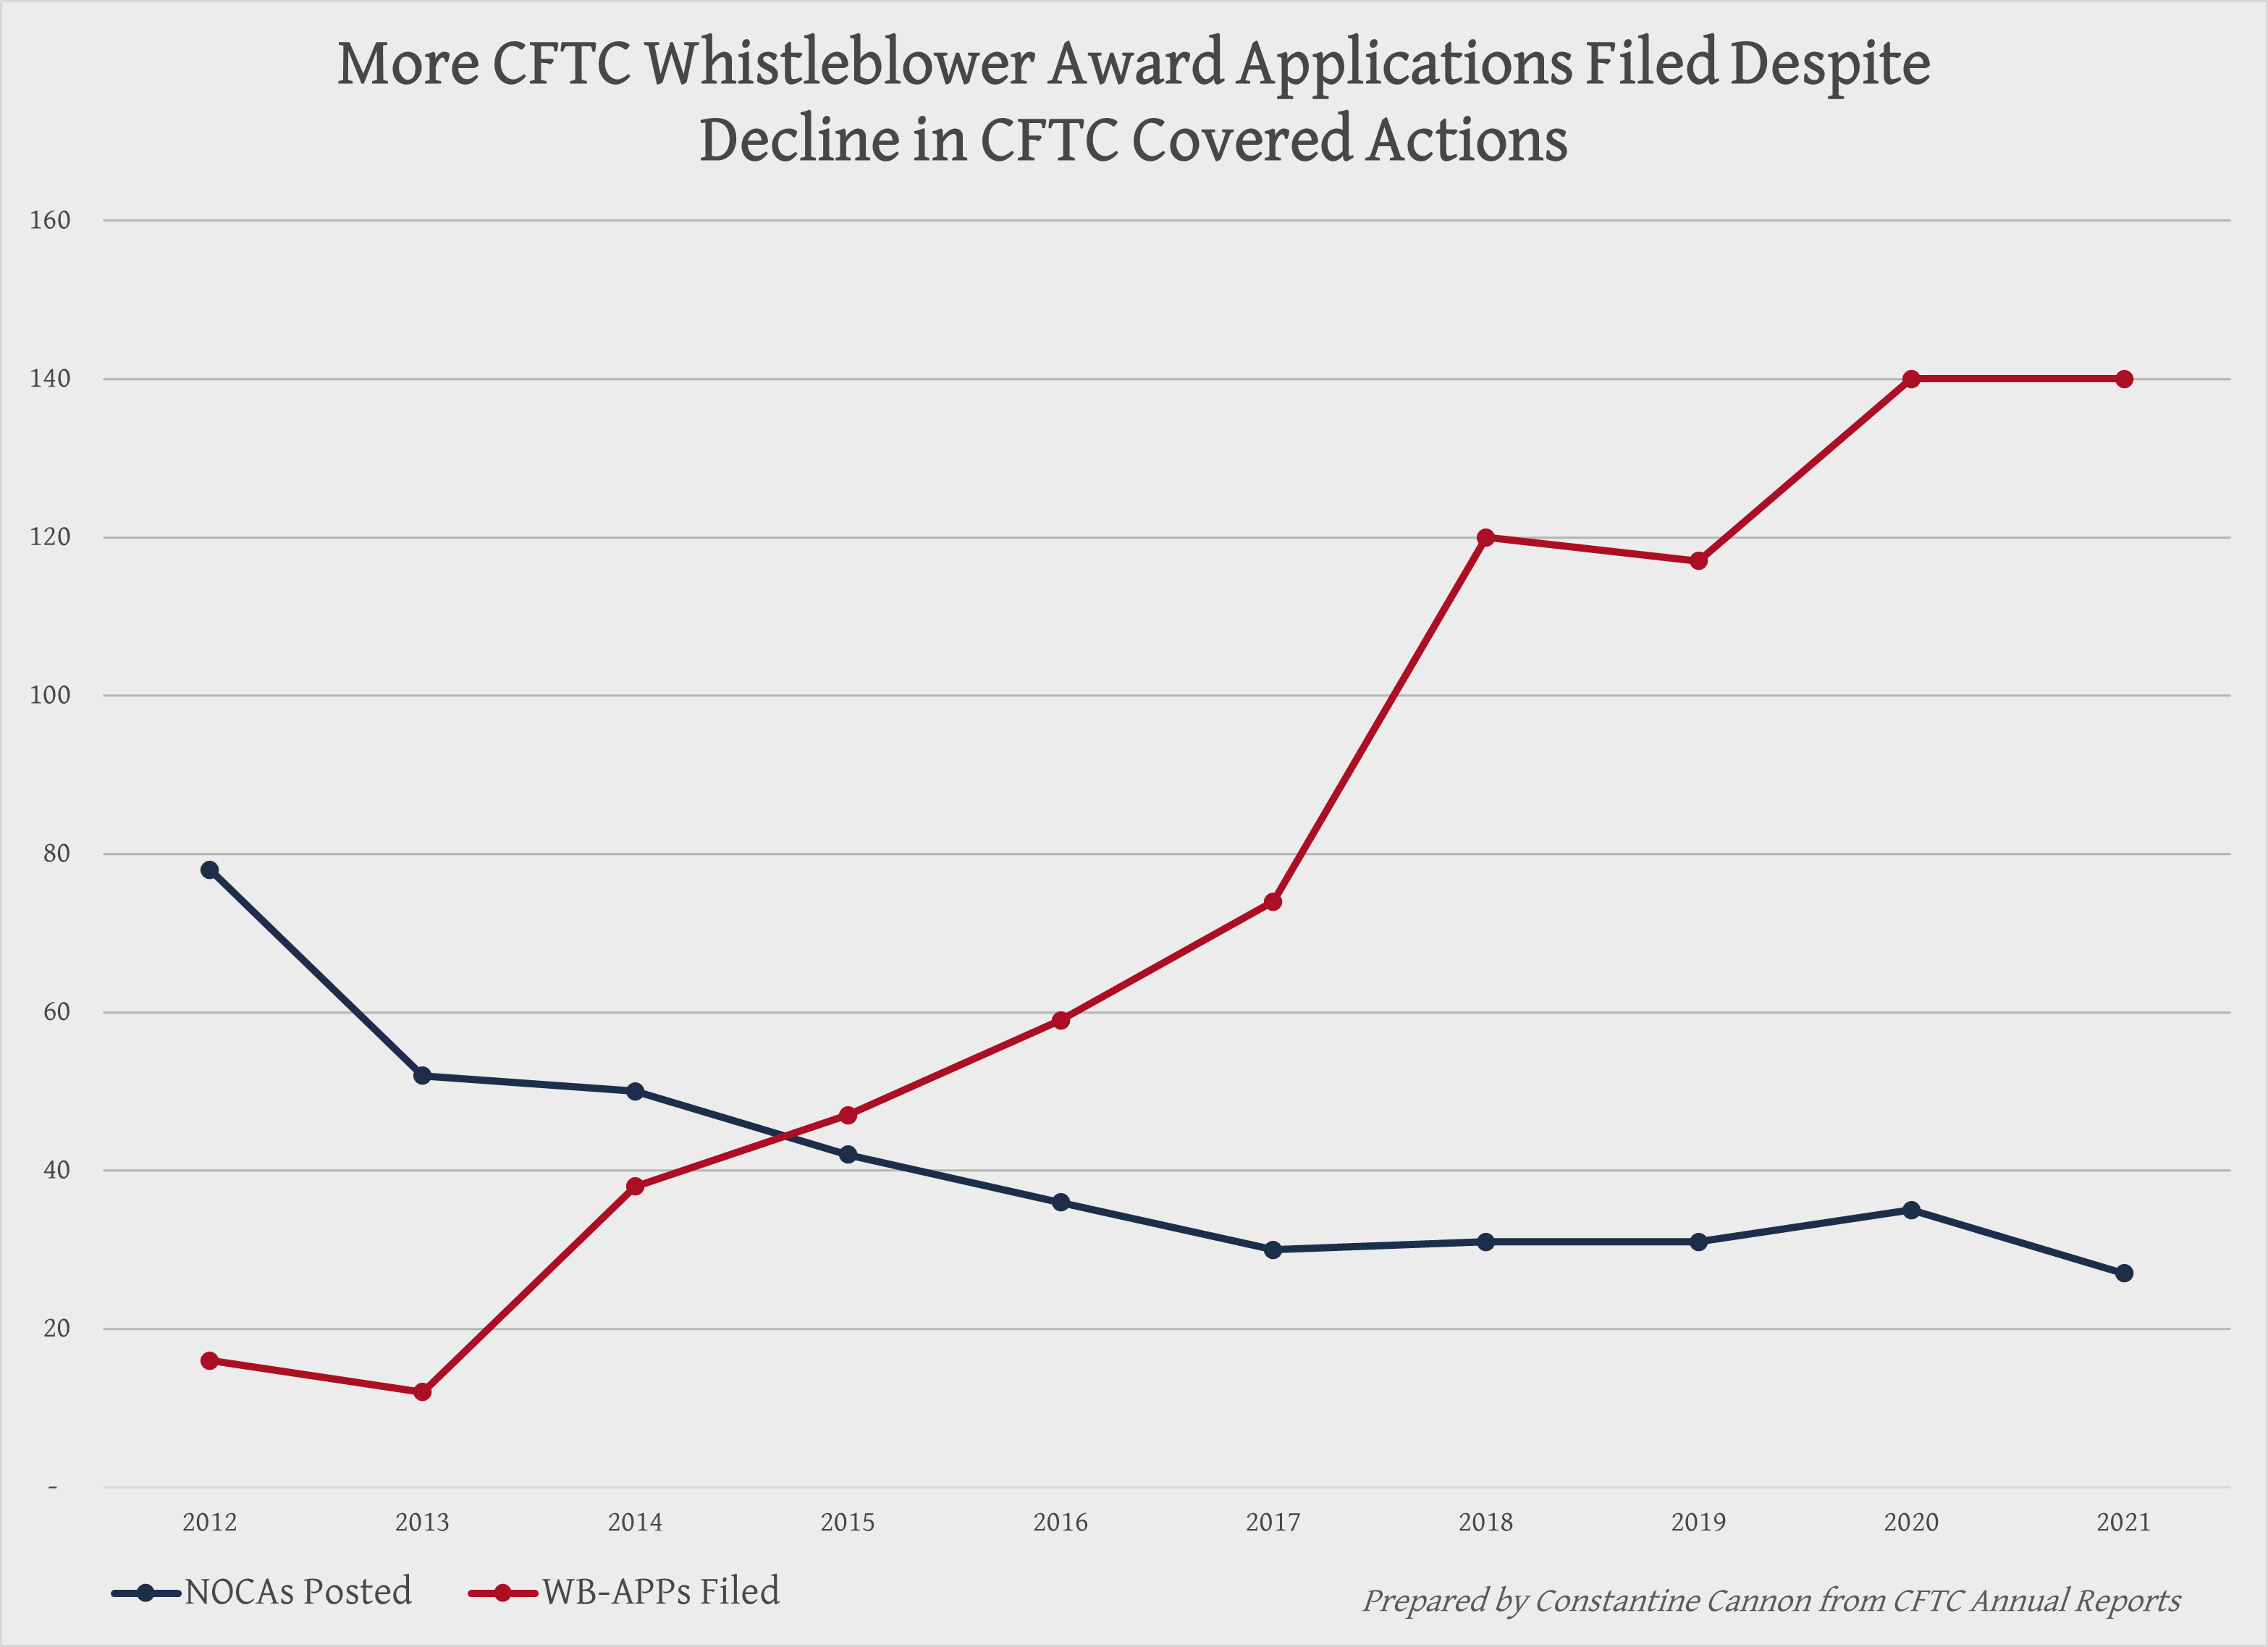 CFTC NOCAs vs. WB-Apps, by year, 2012-2021